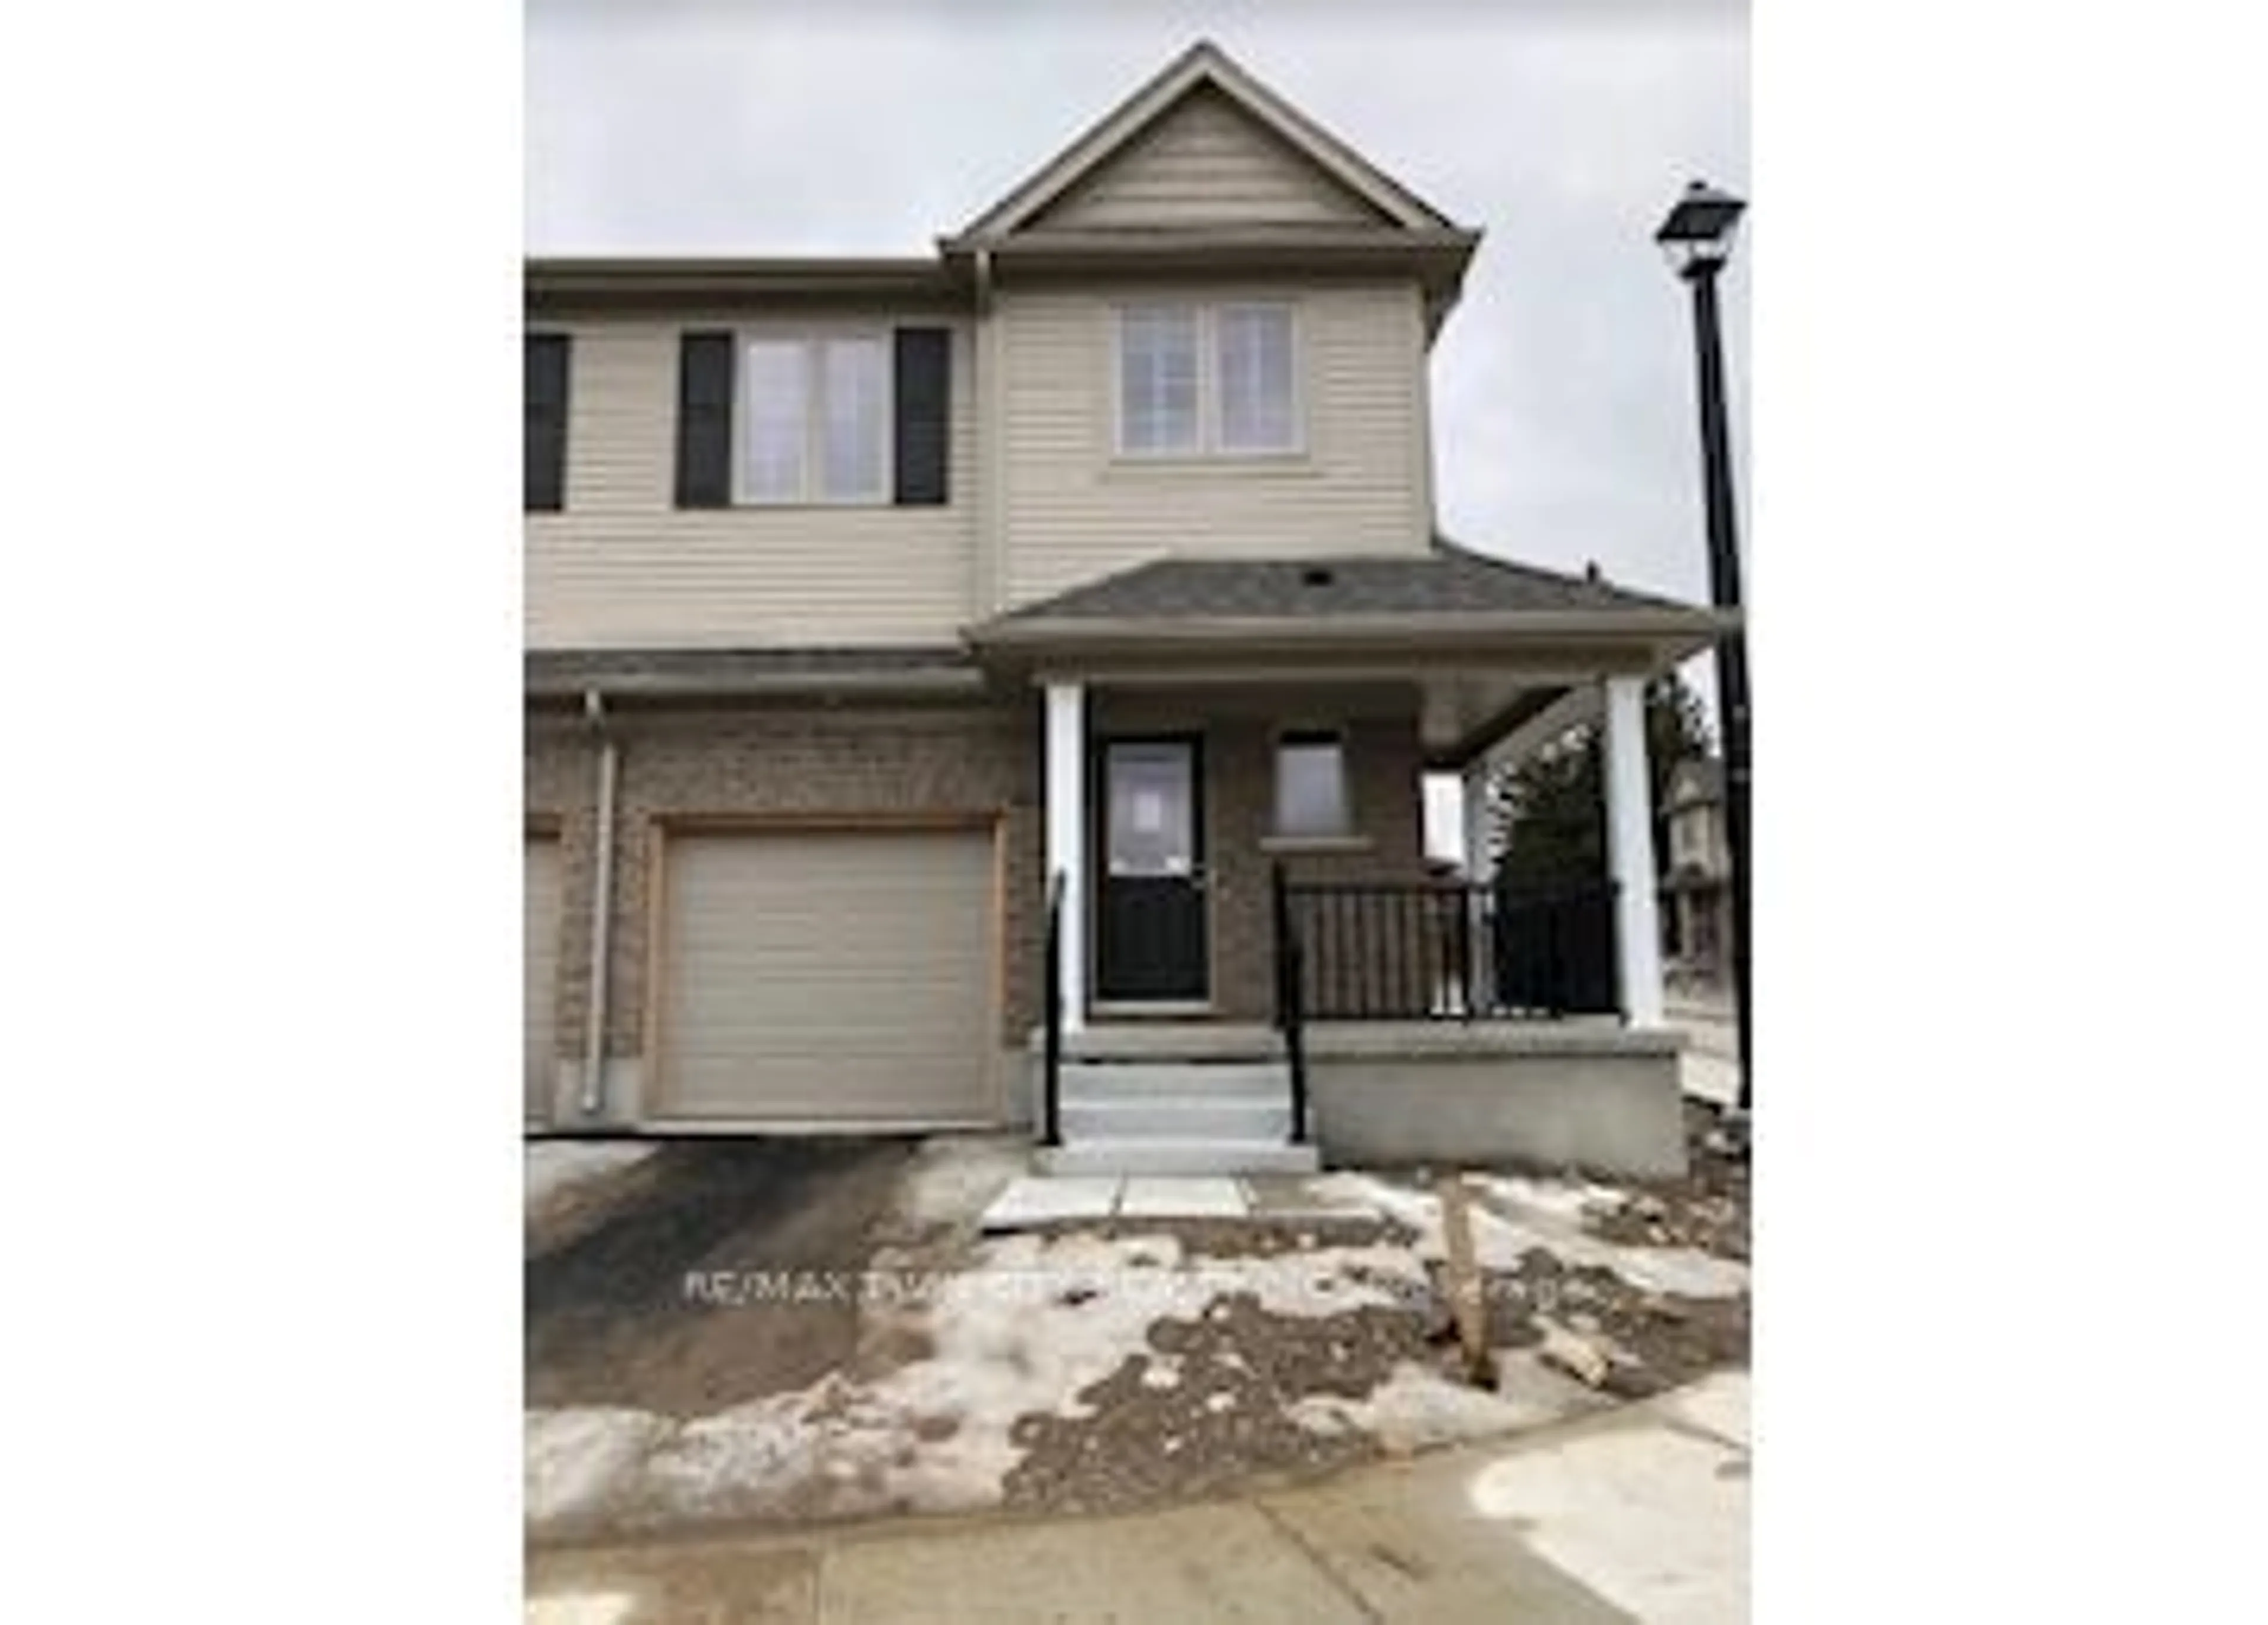 Home with unknown exterior material for 50 Pinnacle Dr #40, Kitchener Ontario N2P 1C5